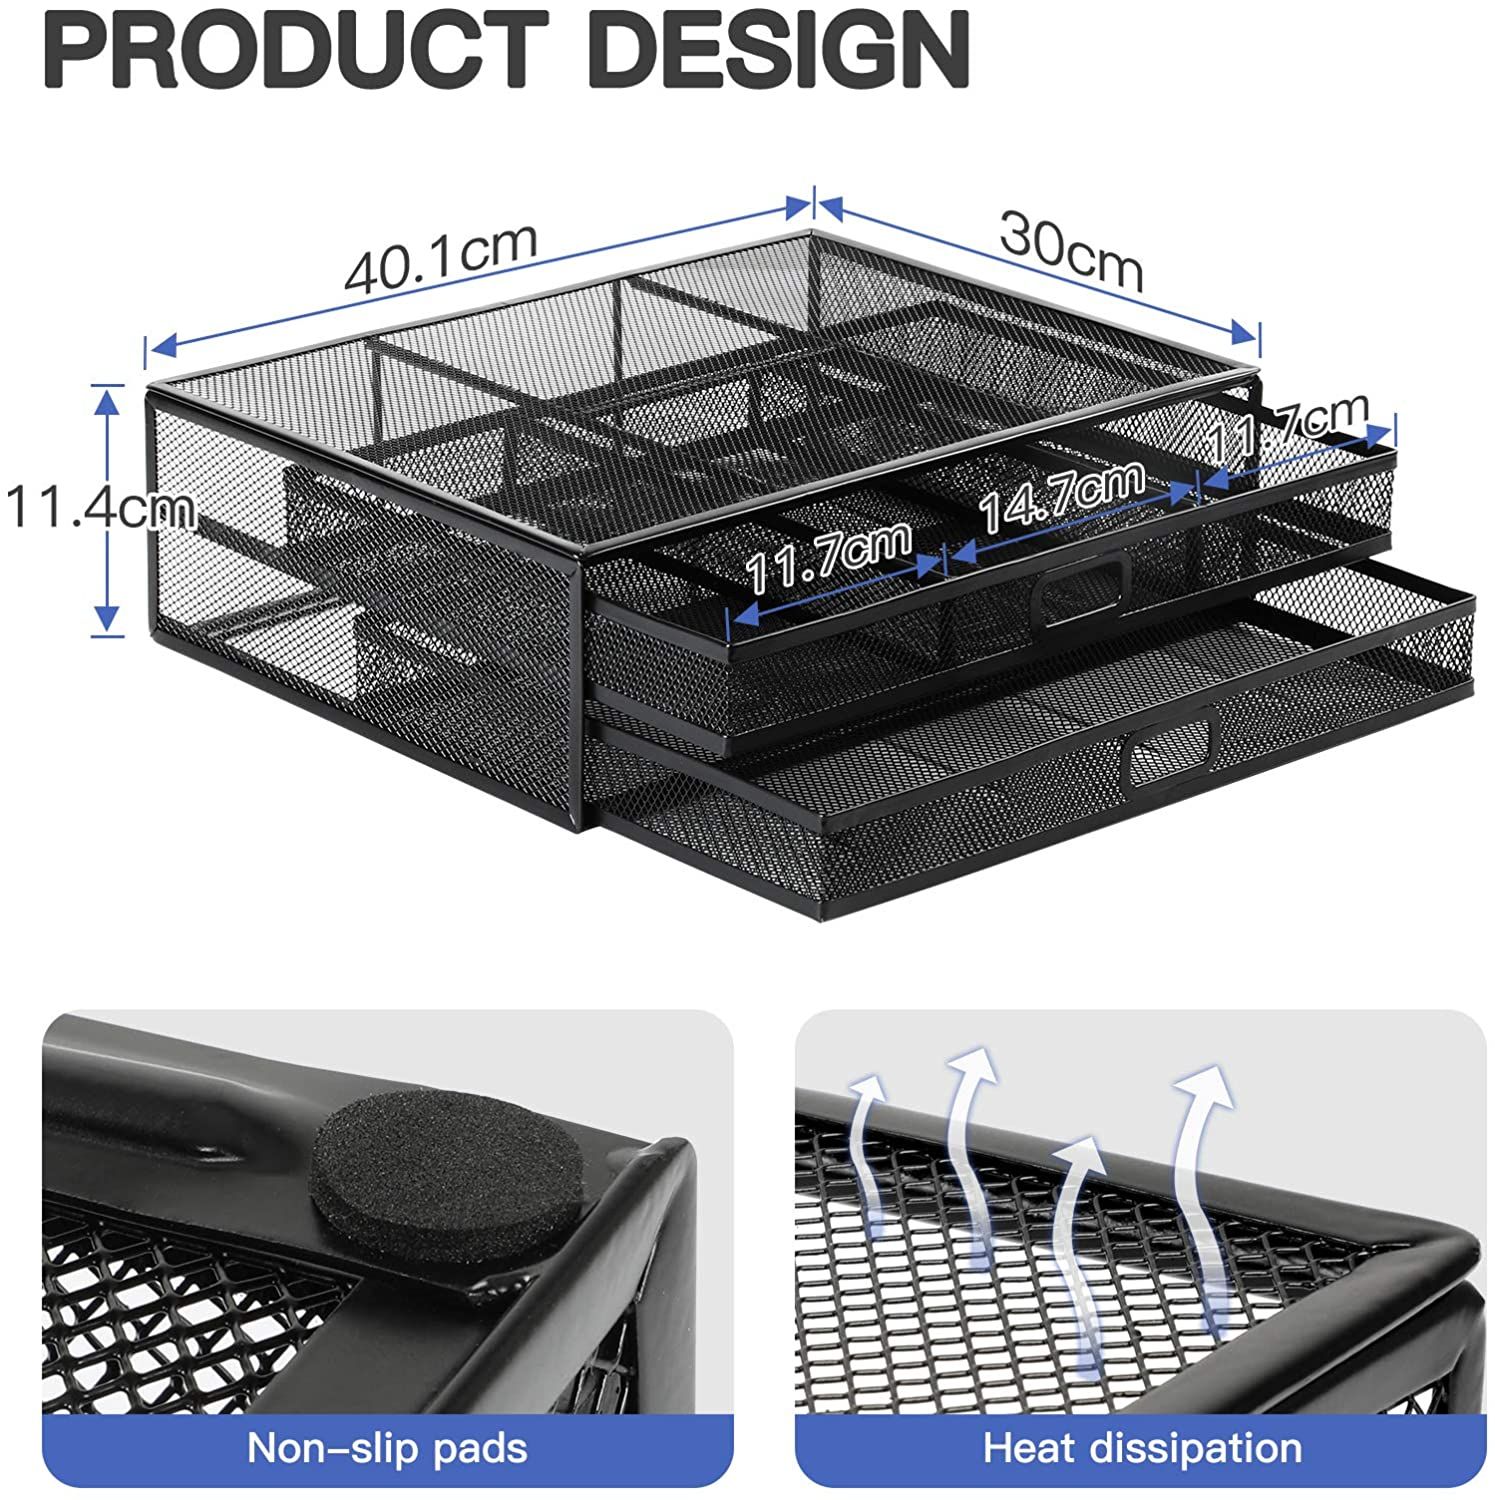 product dimensions for the huanuo monitor stand